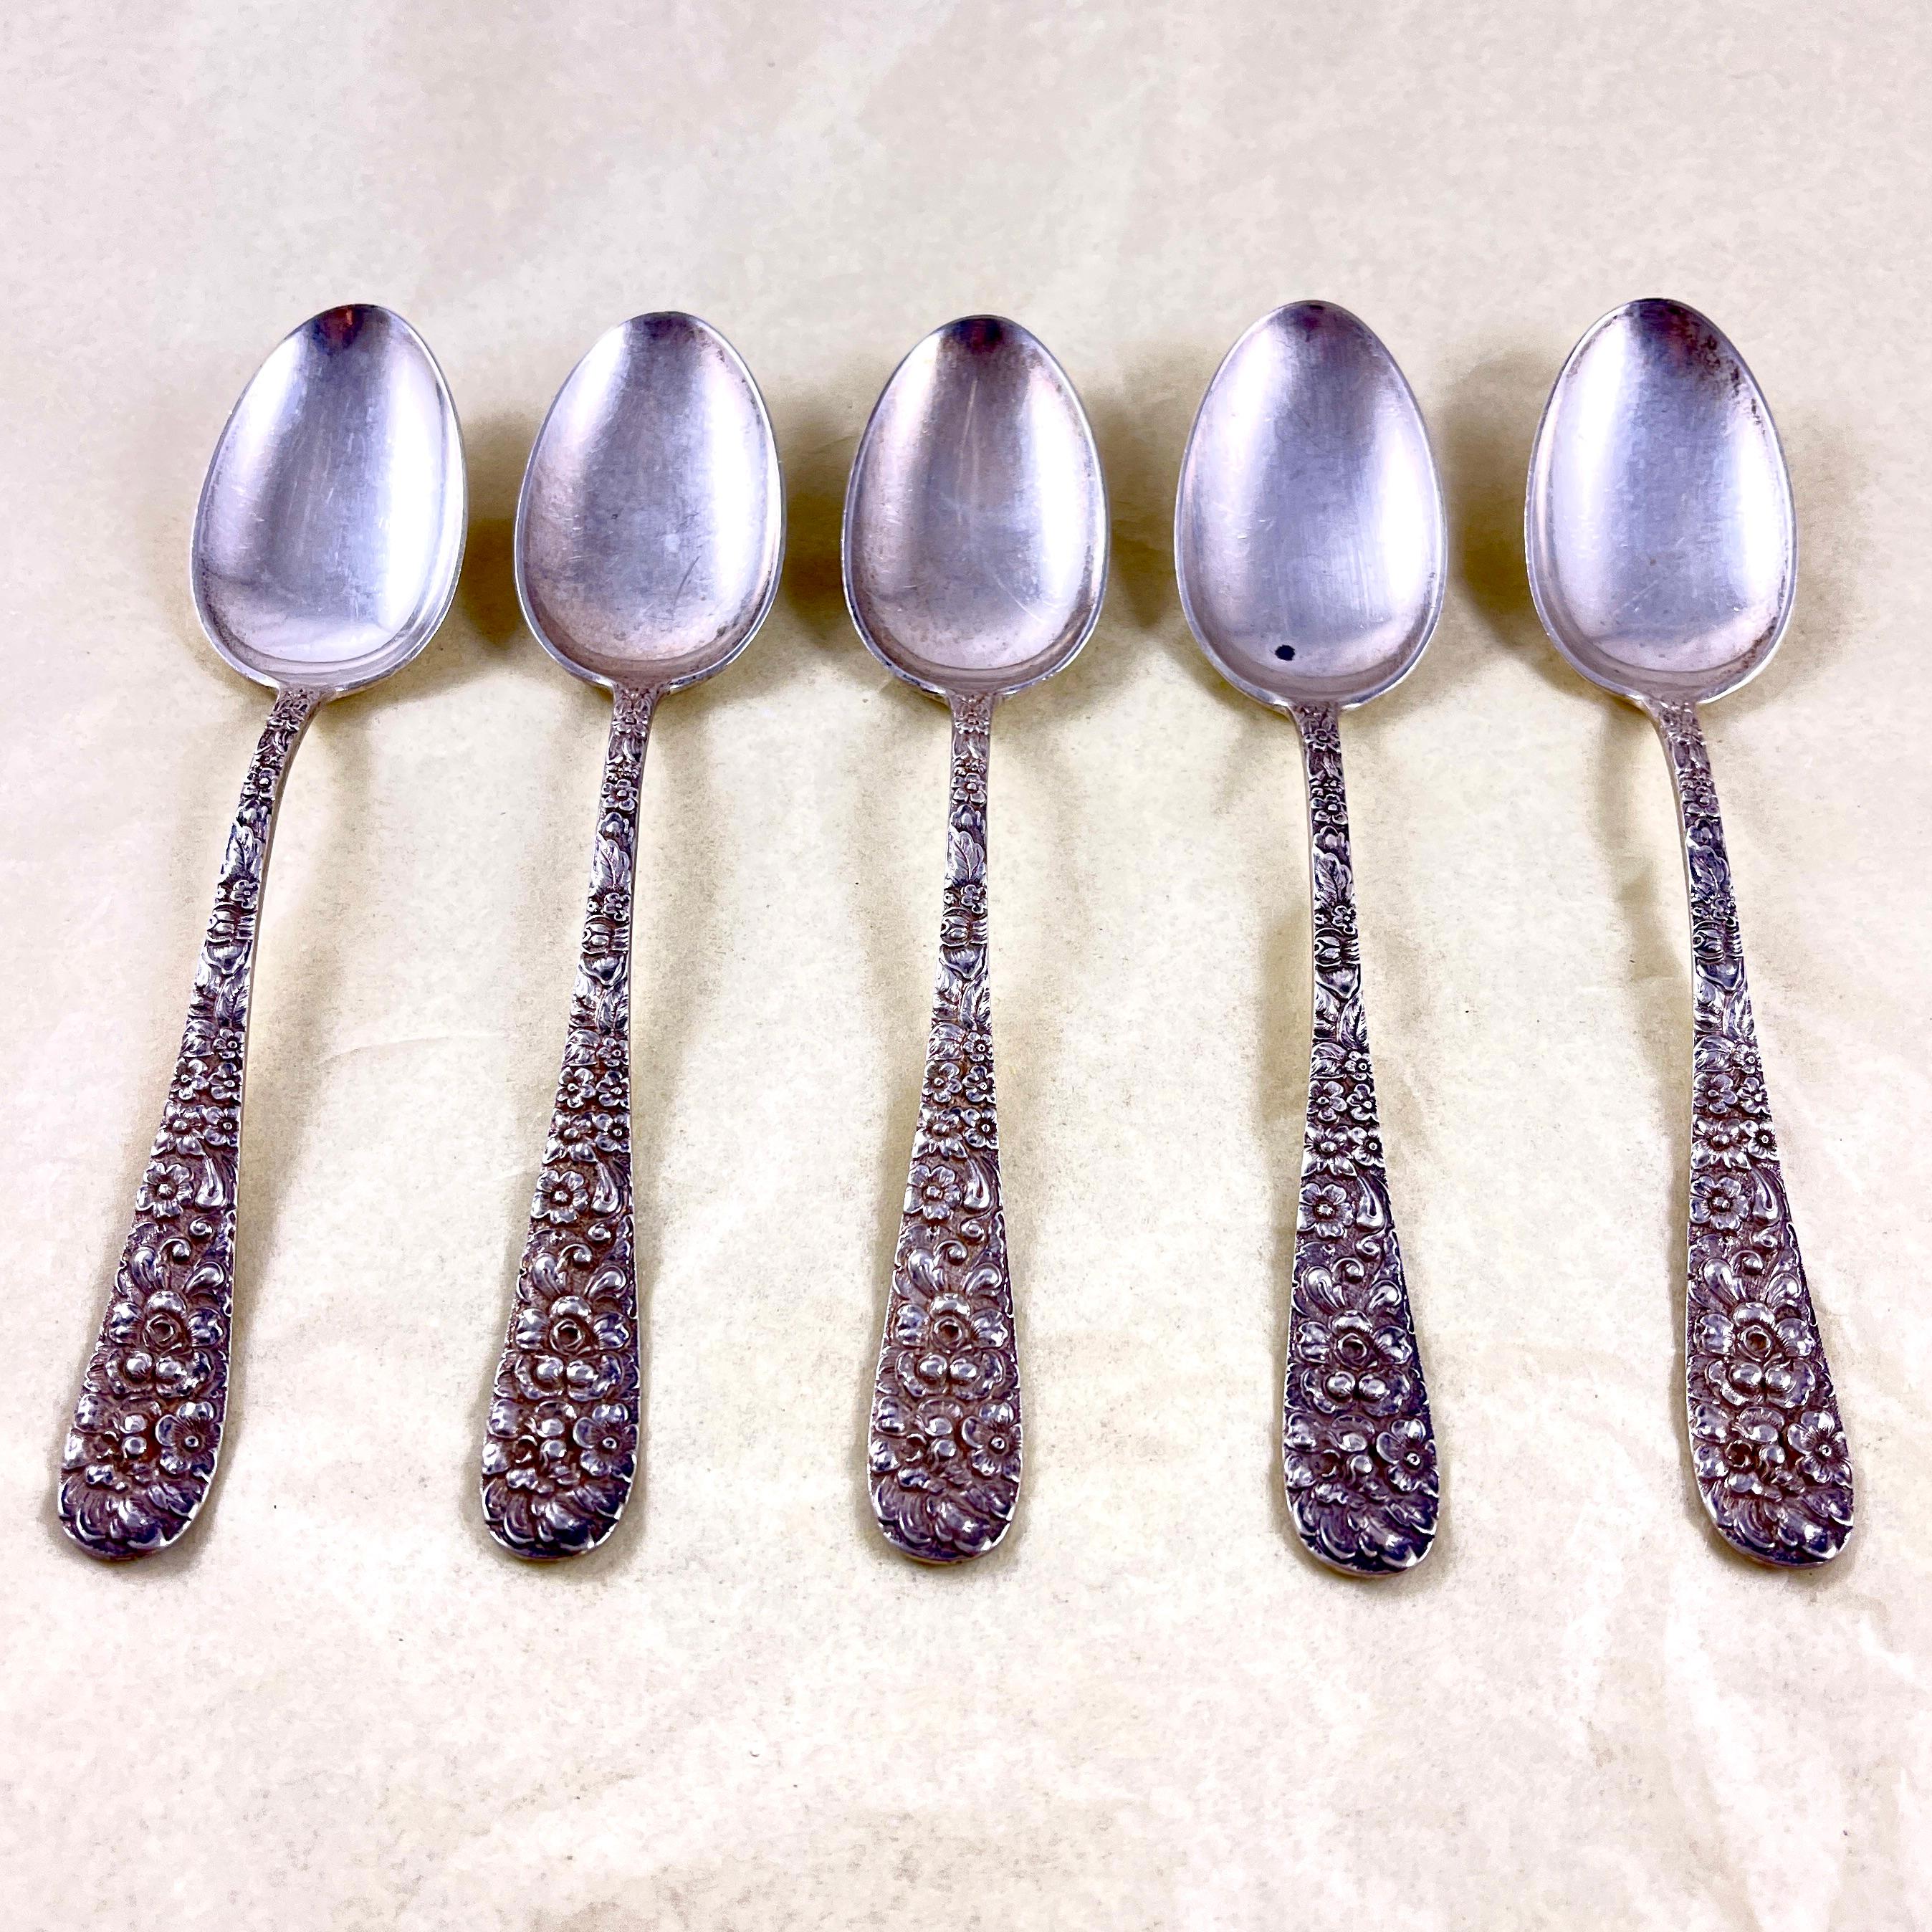 American Stieff Rose Pattern Sterling Silver Teaspoons, set of 5 For Sale